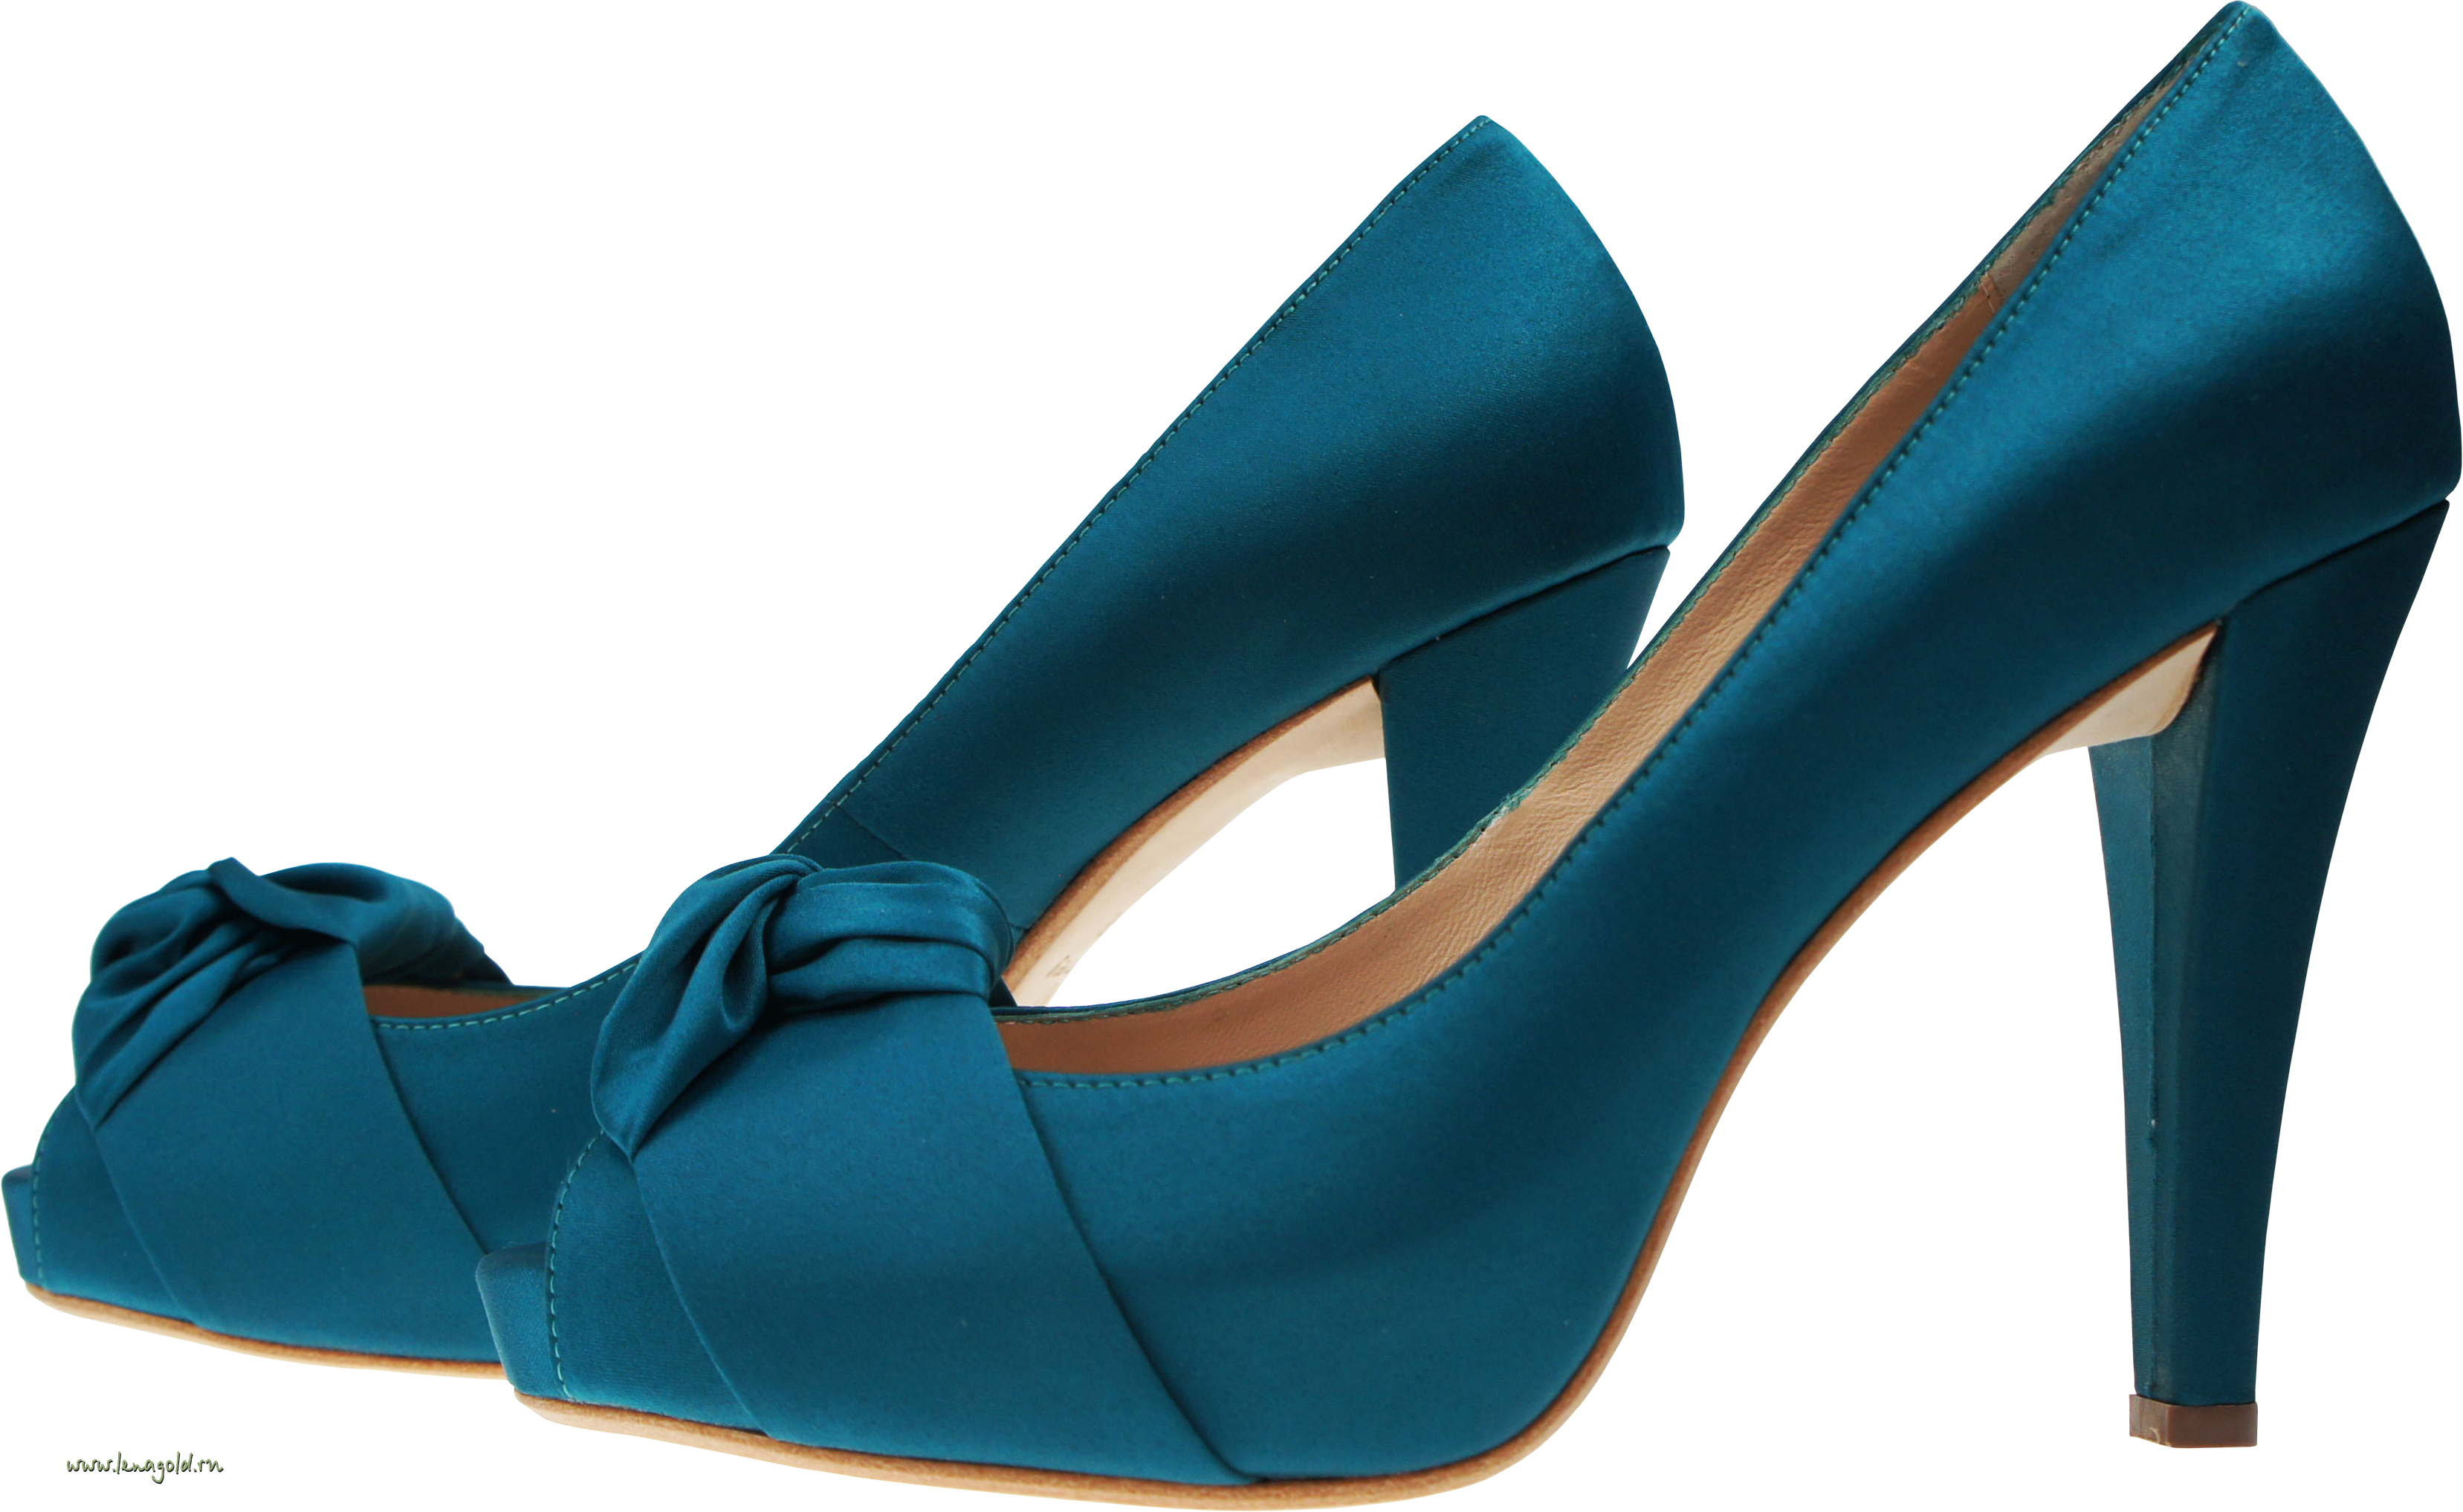 Women Shoes Png Images Transparent Background Png Play Images